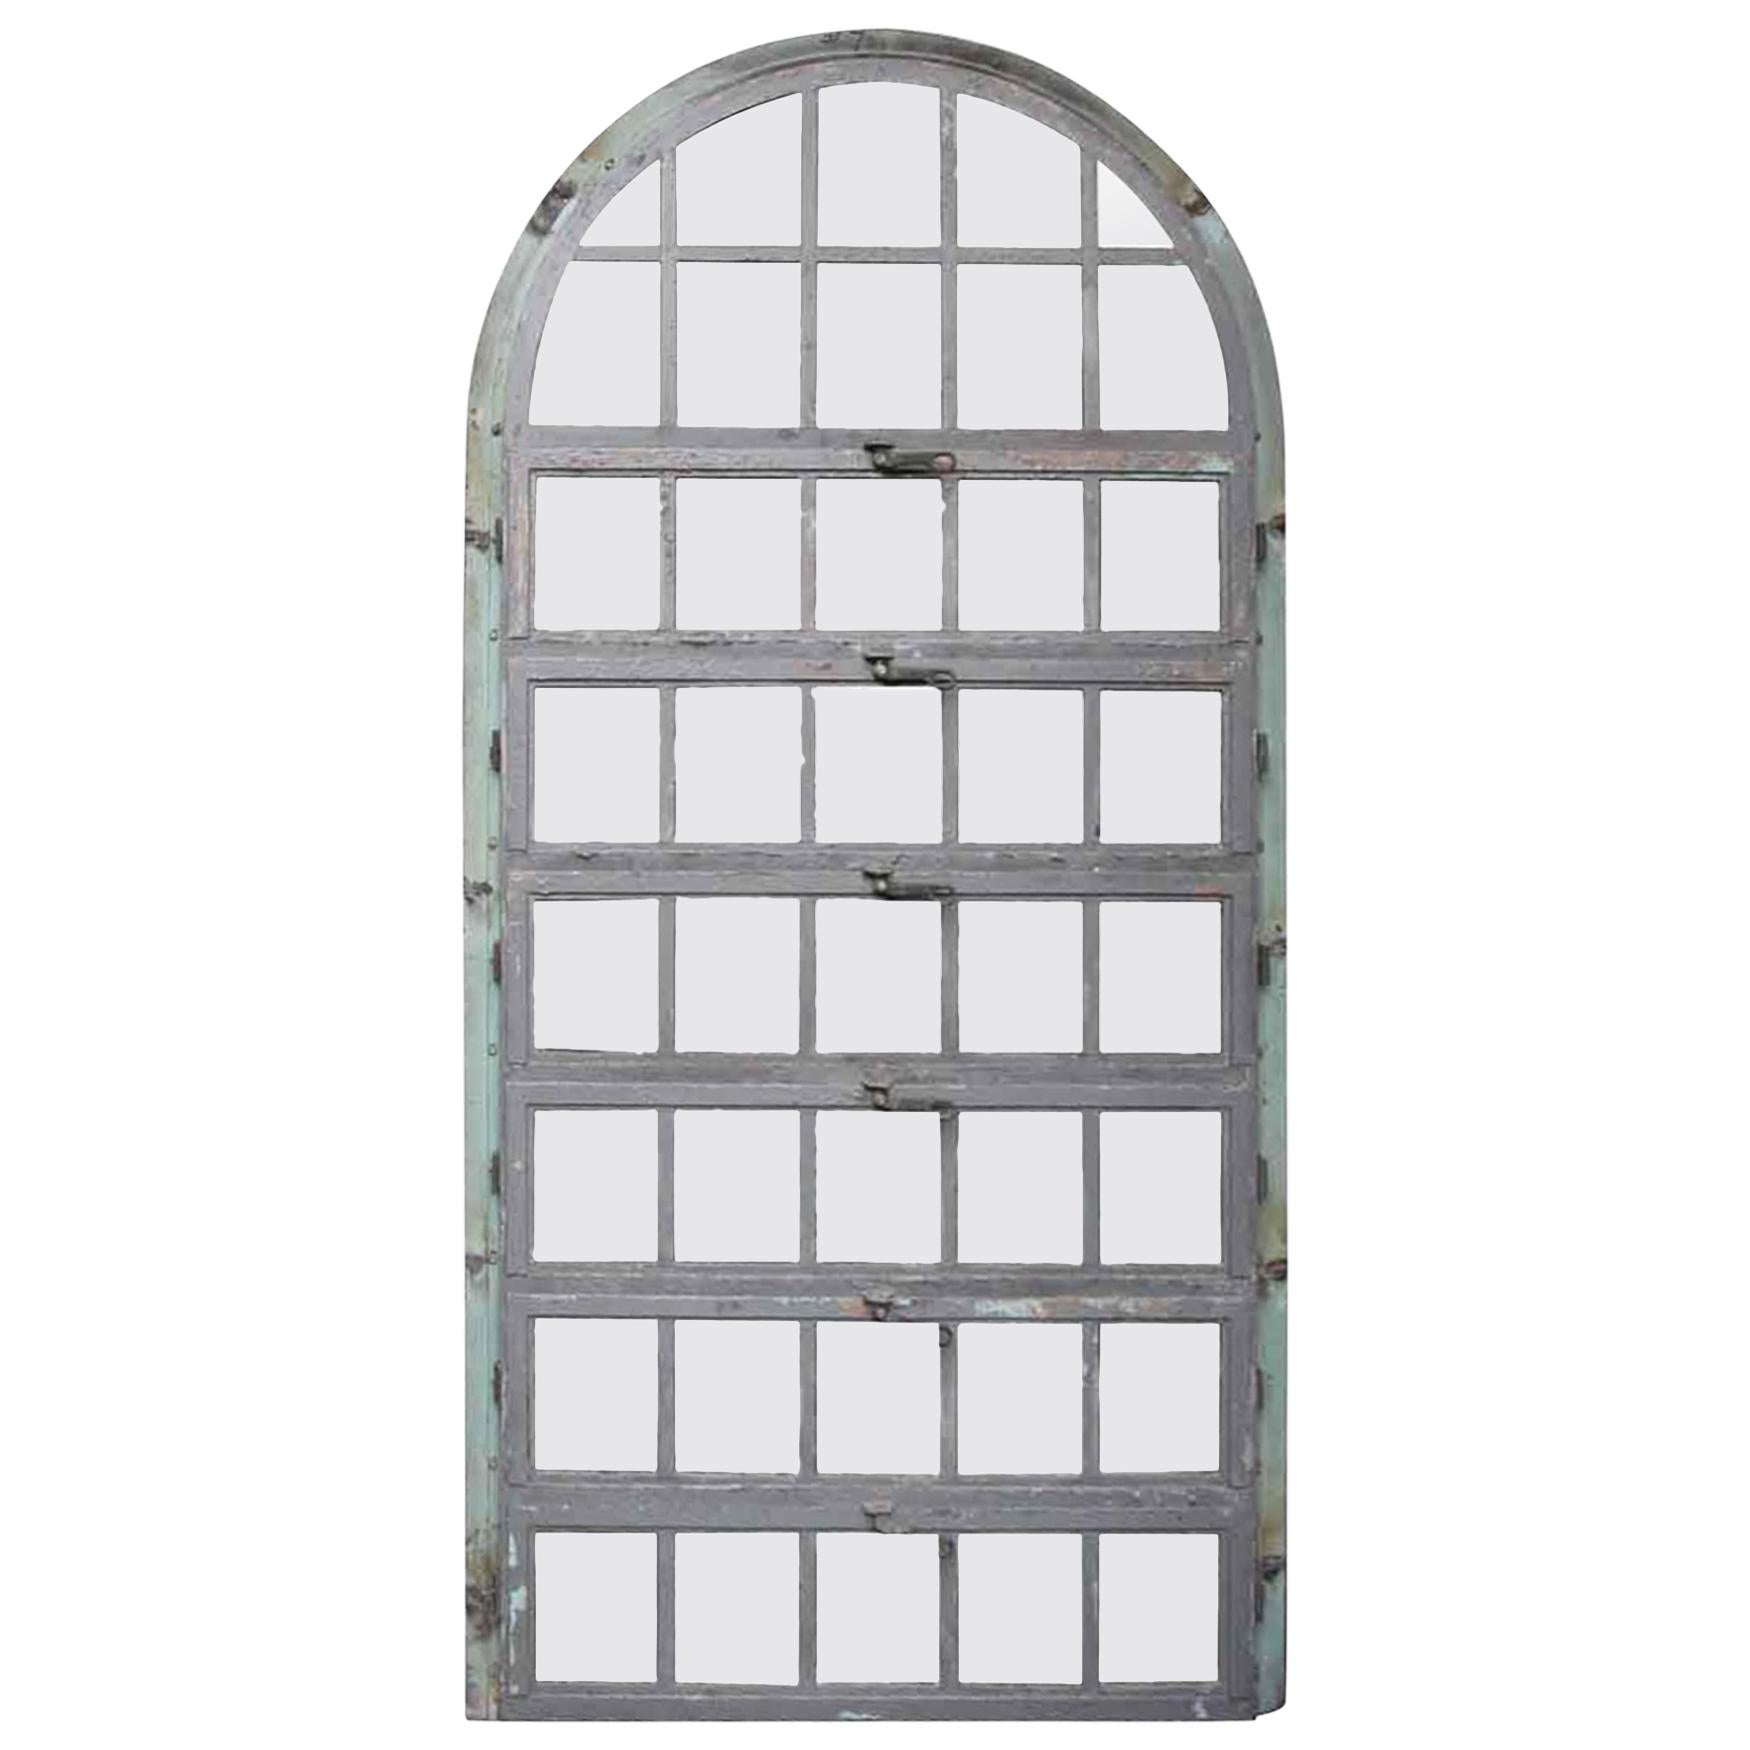 1930 New Jersey Steel Palladian Window with Horizontal Openings and Frame